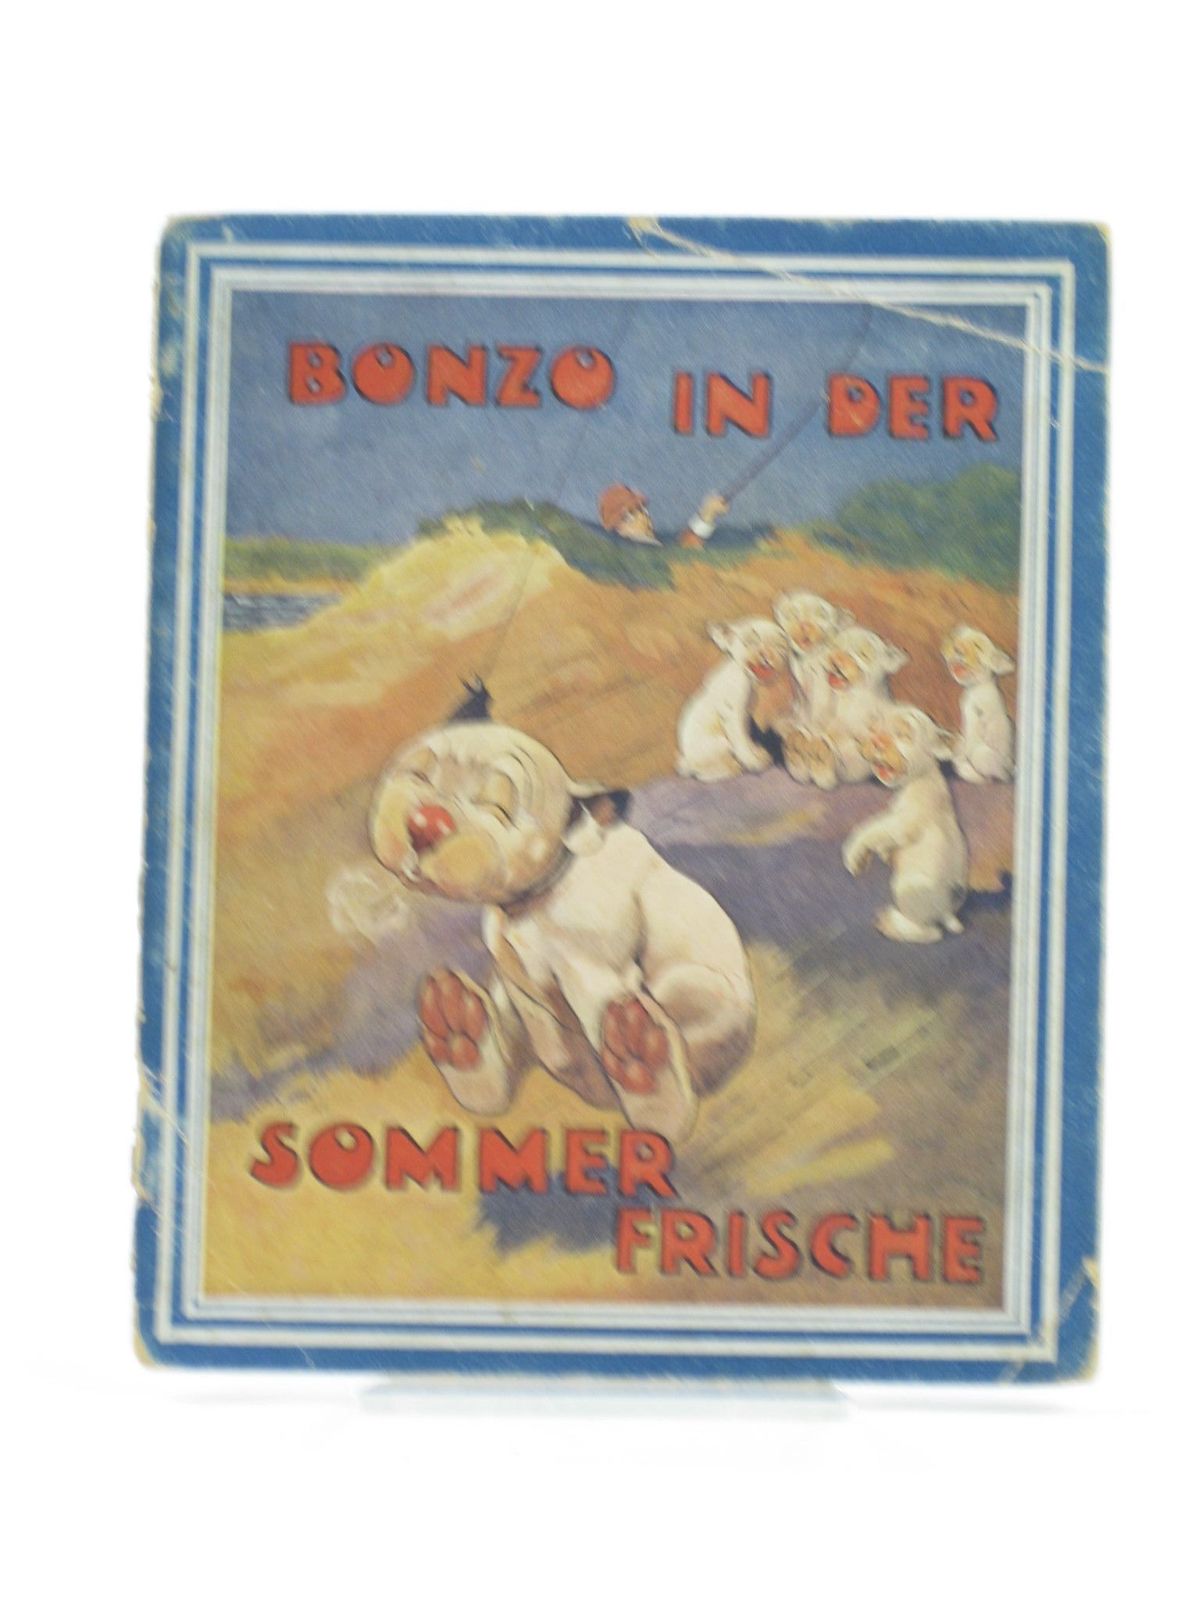 Photo of BONZO IN DER SOMMERFRISCHE written by Studdy, G.E. Jellicoe, George illustrated by Studdy, G.E. published by Artur Wolf (STOCK CODE: 1402136)  for sale by Stella & Rose's Books